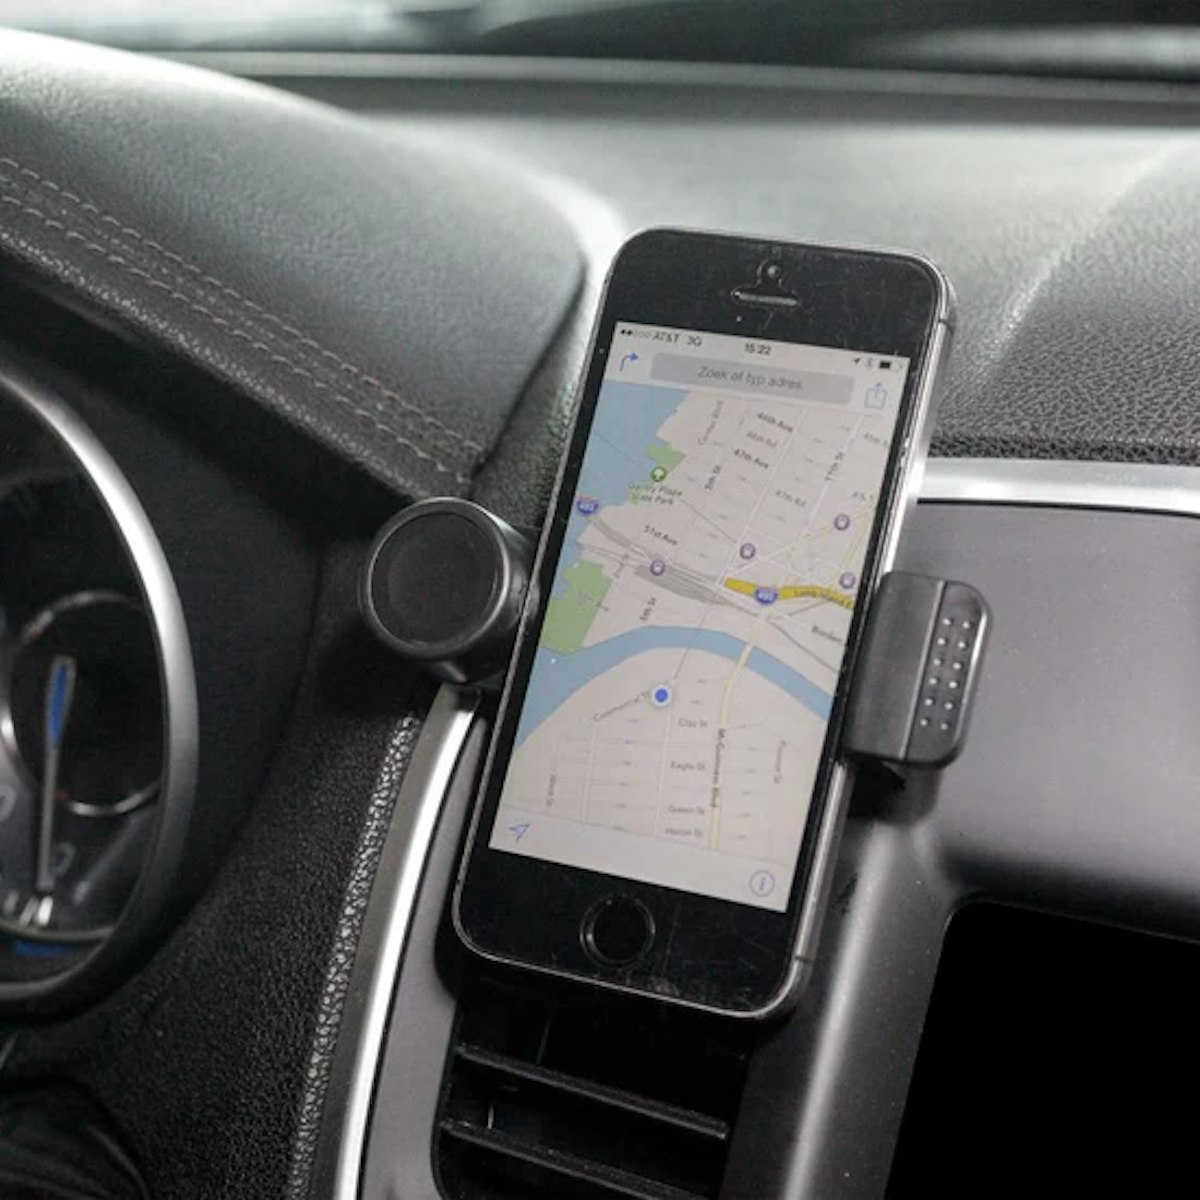 A cell phone on a holder in a car.